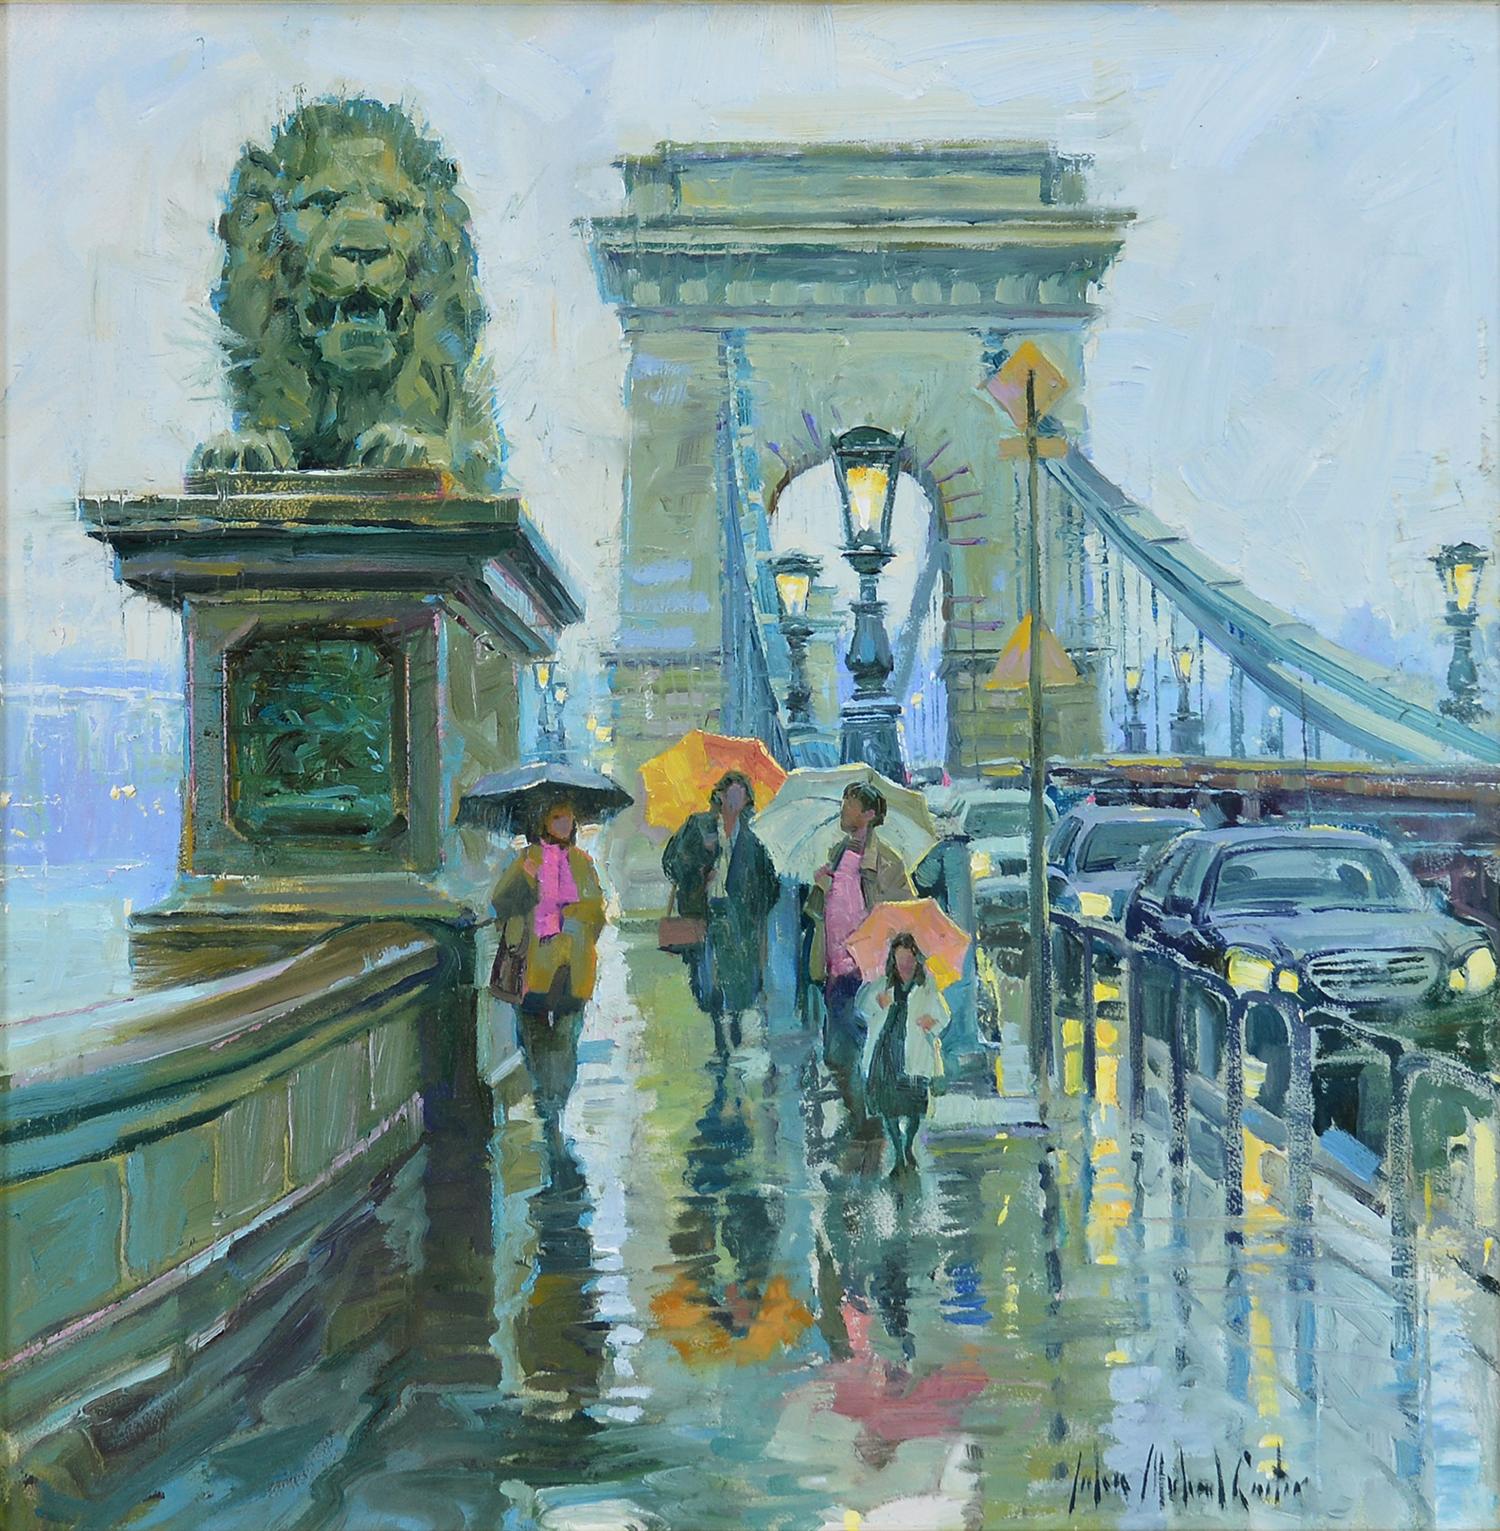 Evening at the Chain Bridge - Painting by John Michael Carter